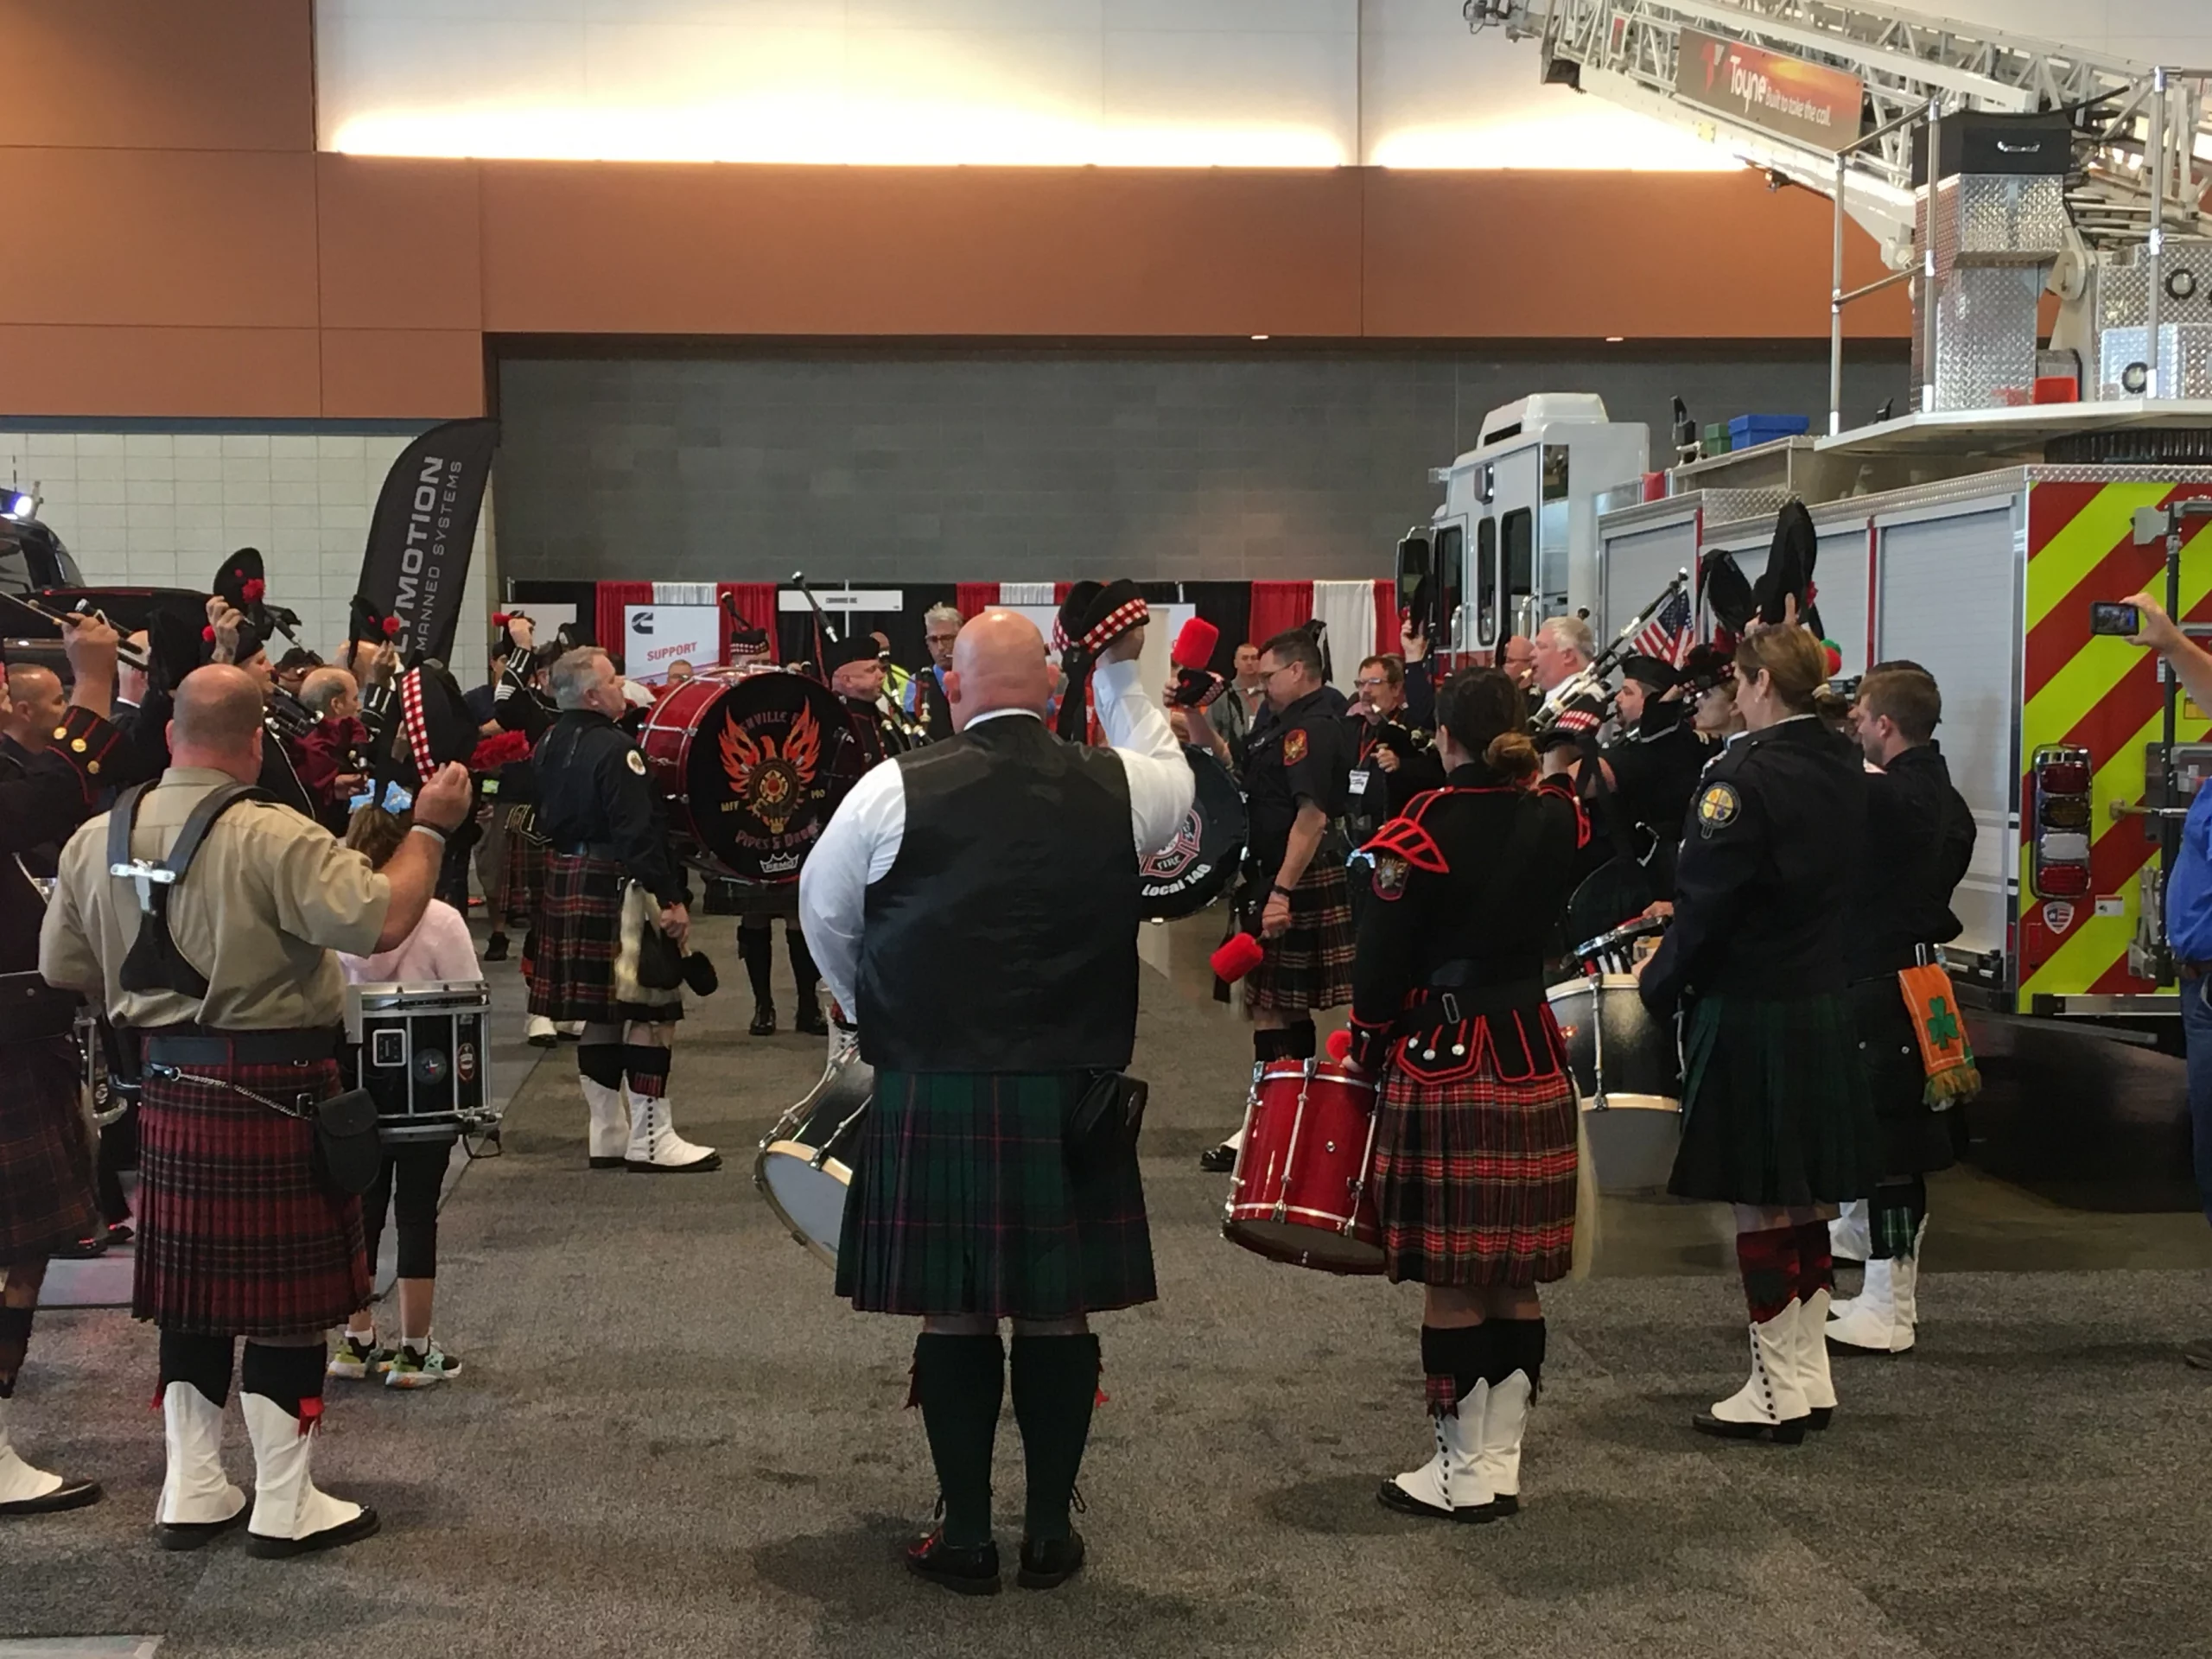 A firefighter bagpipe and drums unit performs at the 2019 Firehouse Expo.